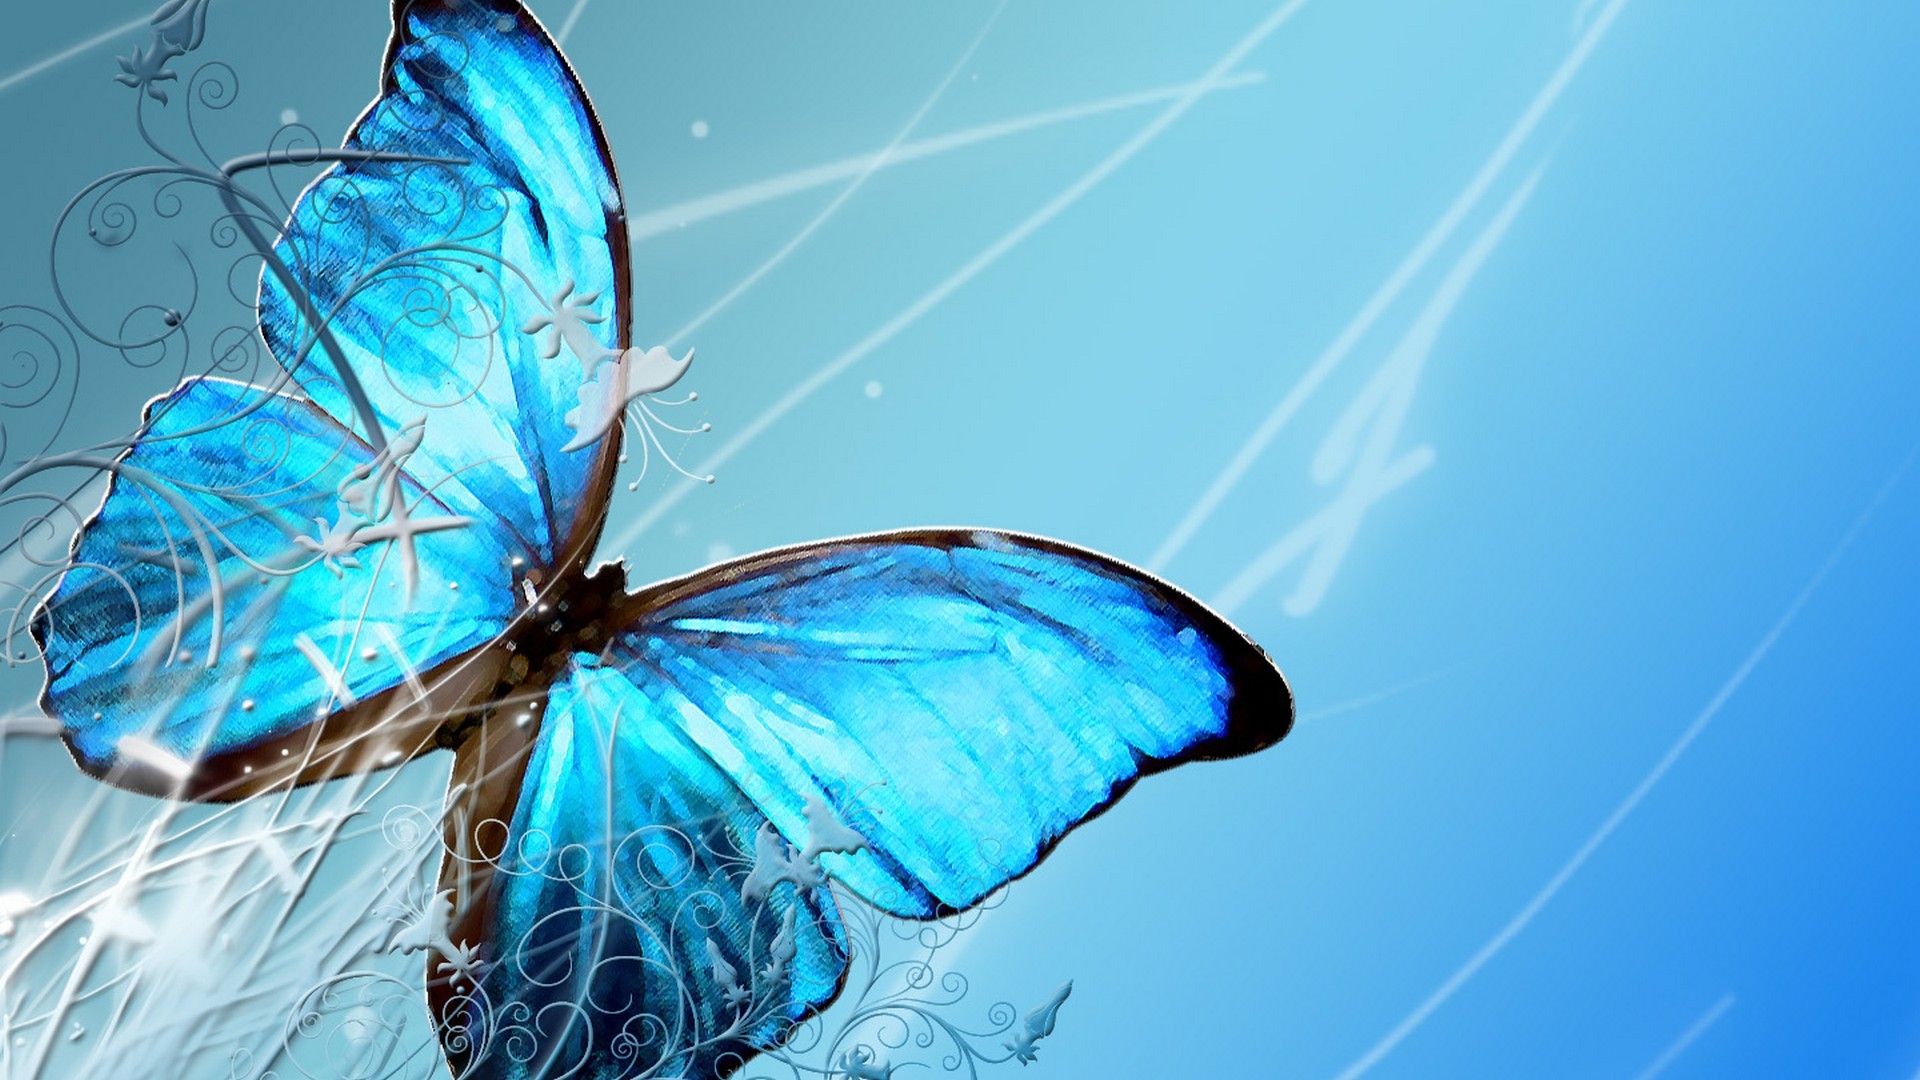 Blue Butterfly HD Backgrounds With Resolution 1920X1080